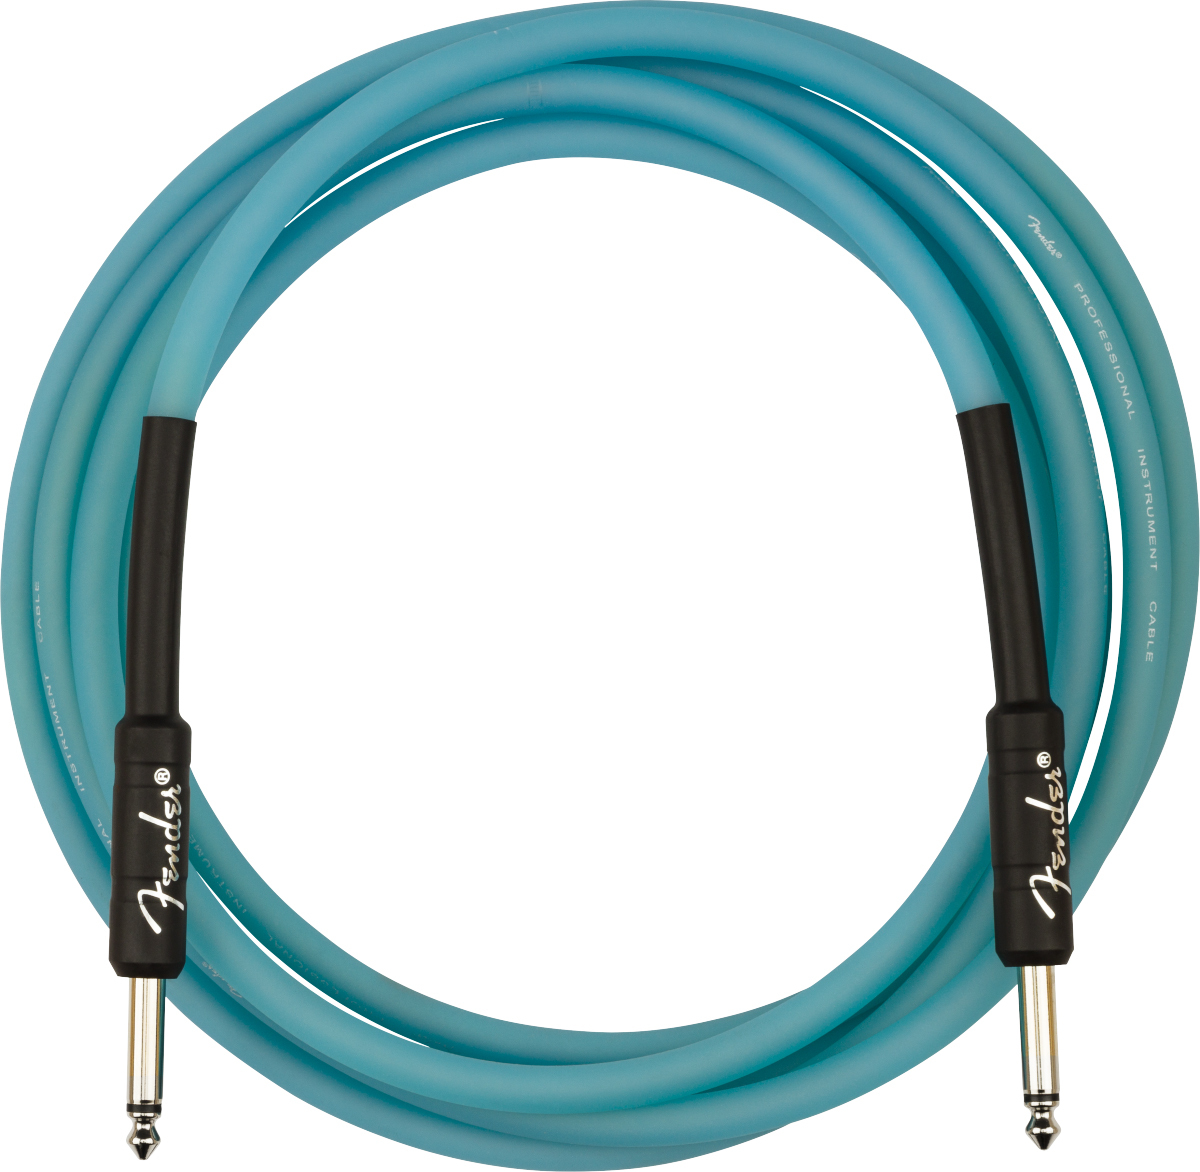 Fender Pro Glow In The Dark Instrument Cable Droit/droit 10ft Blue - Cable - Main picture